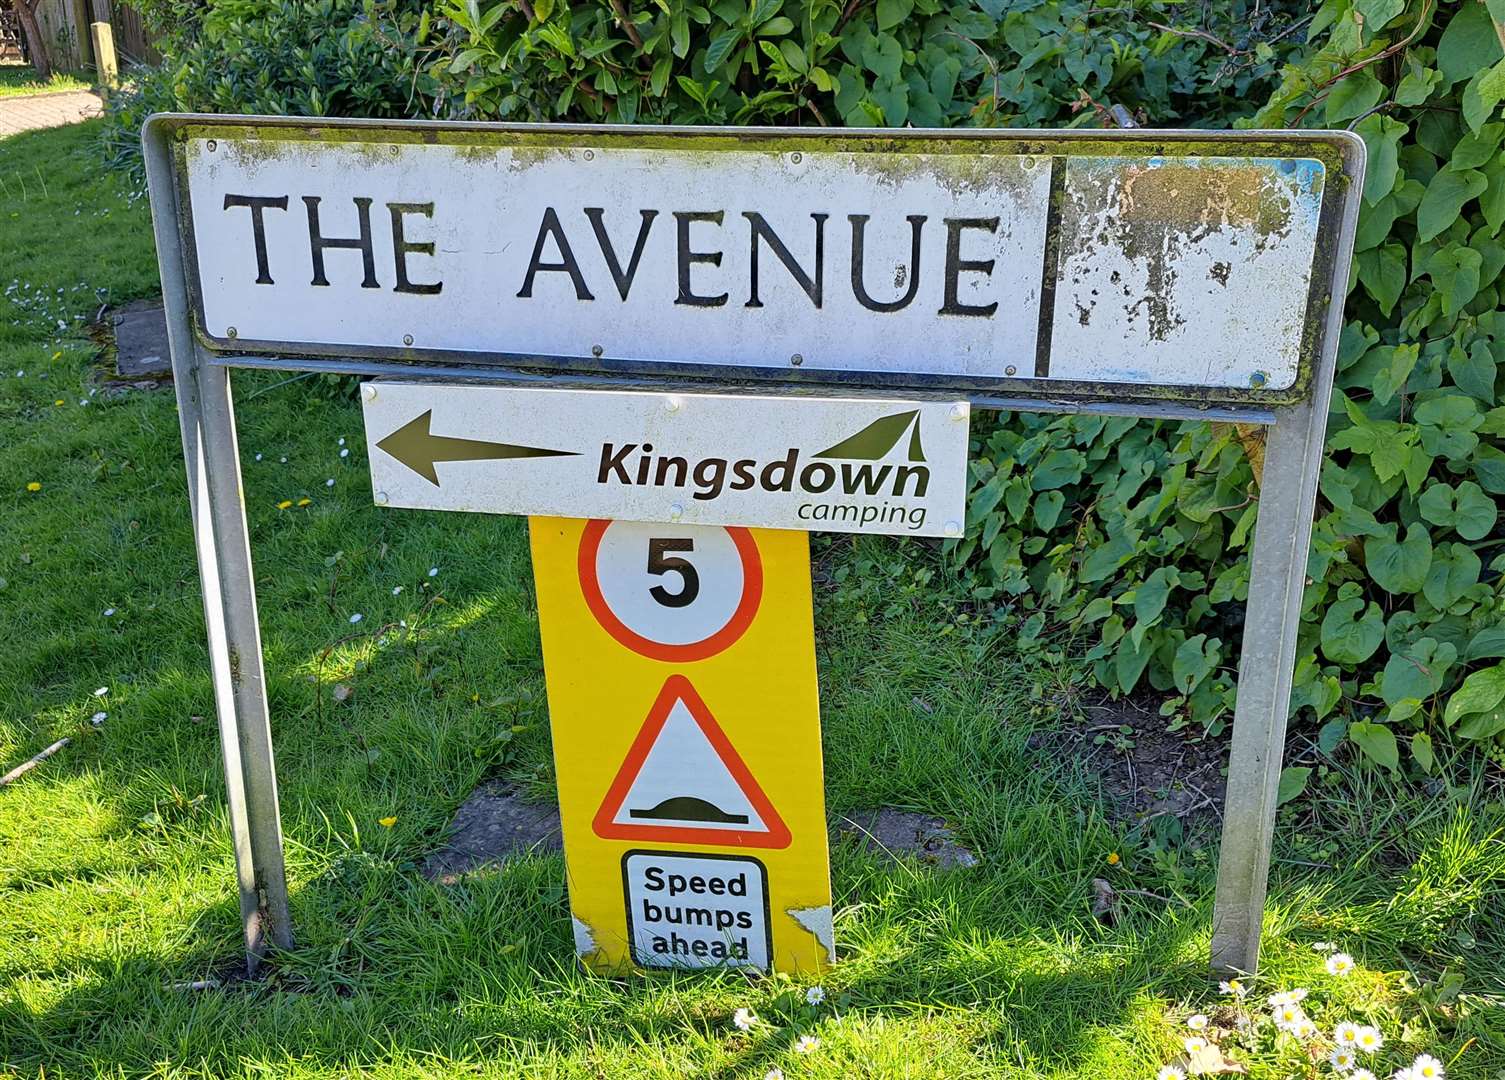 The Avenue, Kingsdown, where the children's home is planned